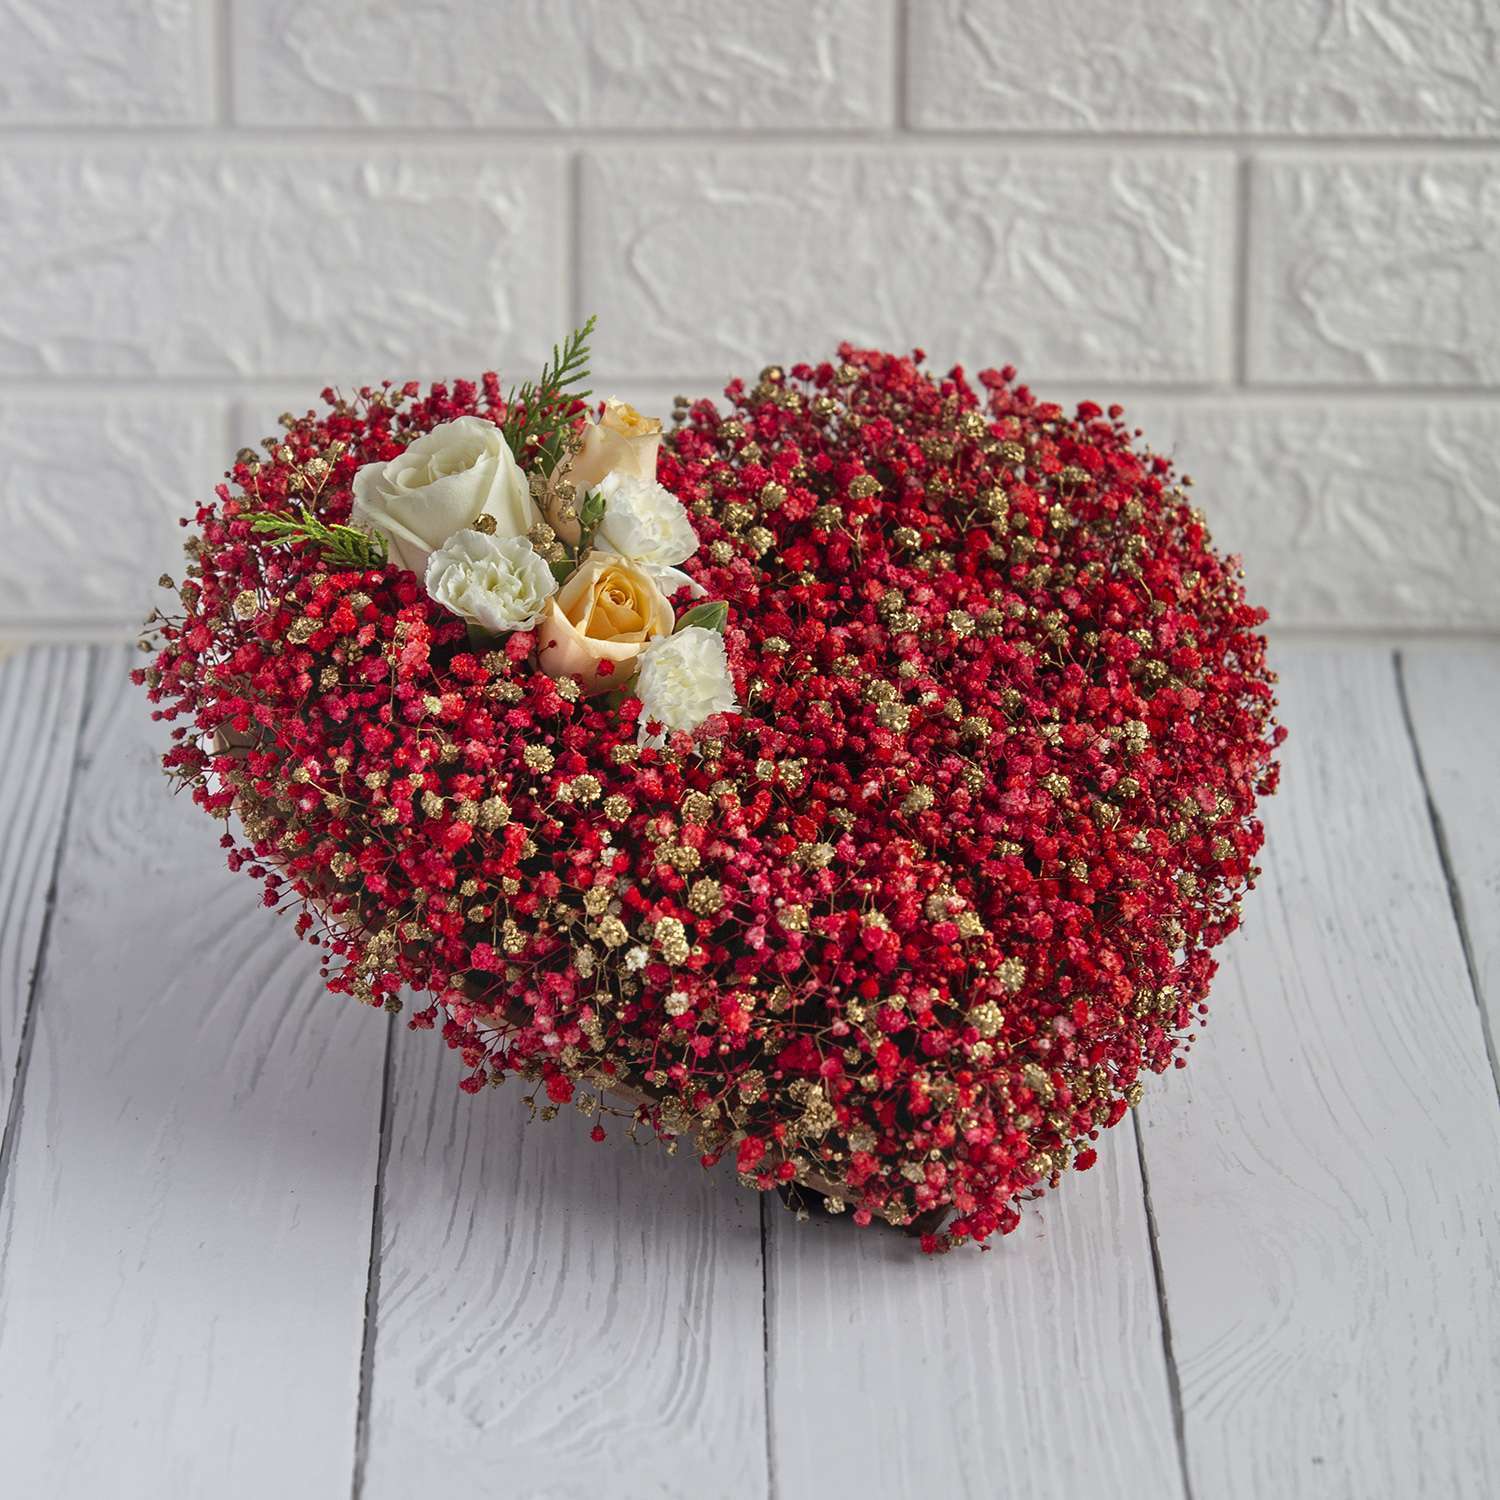 Red Heart Shape Of Beautiful Baby Breath -